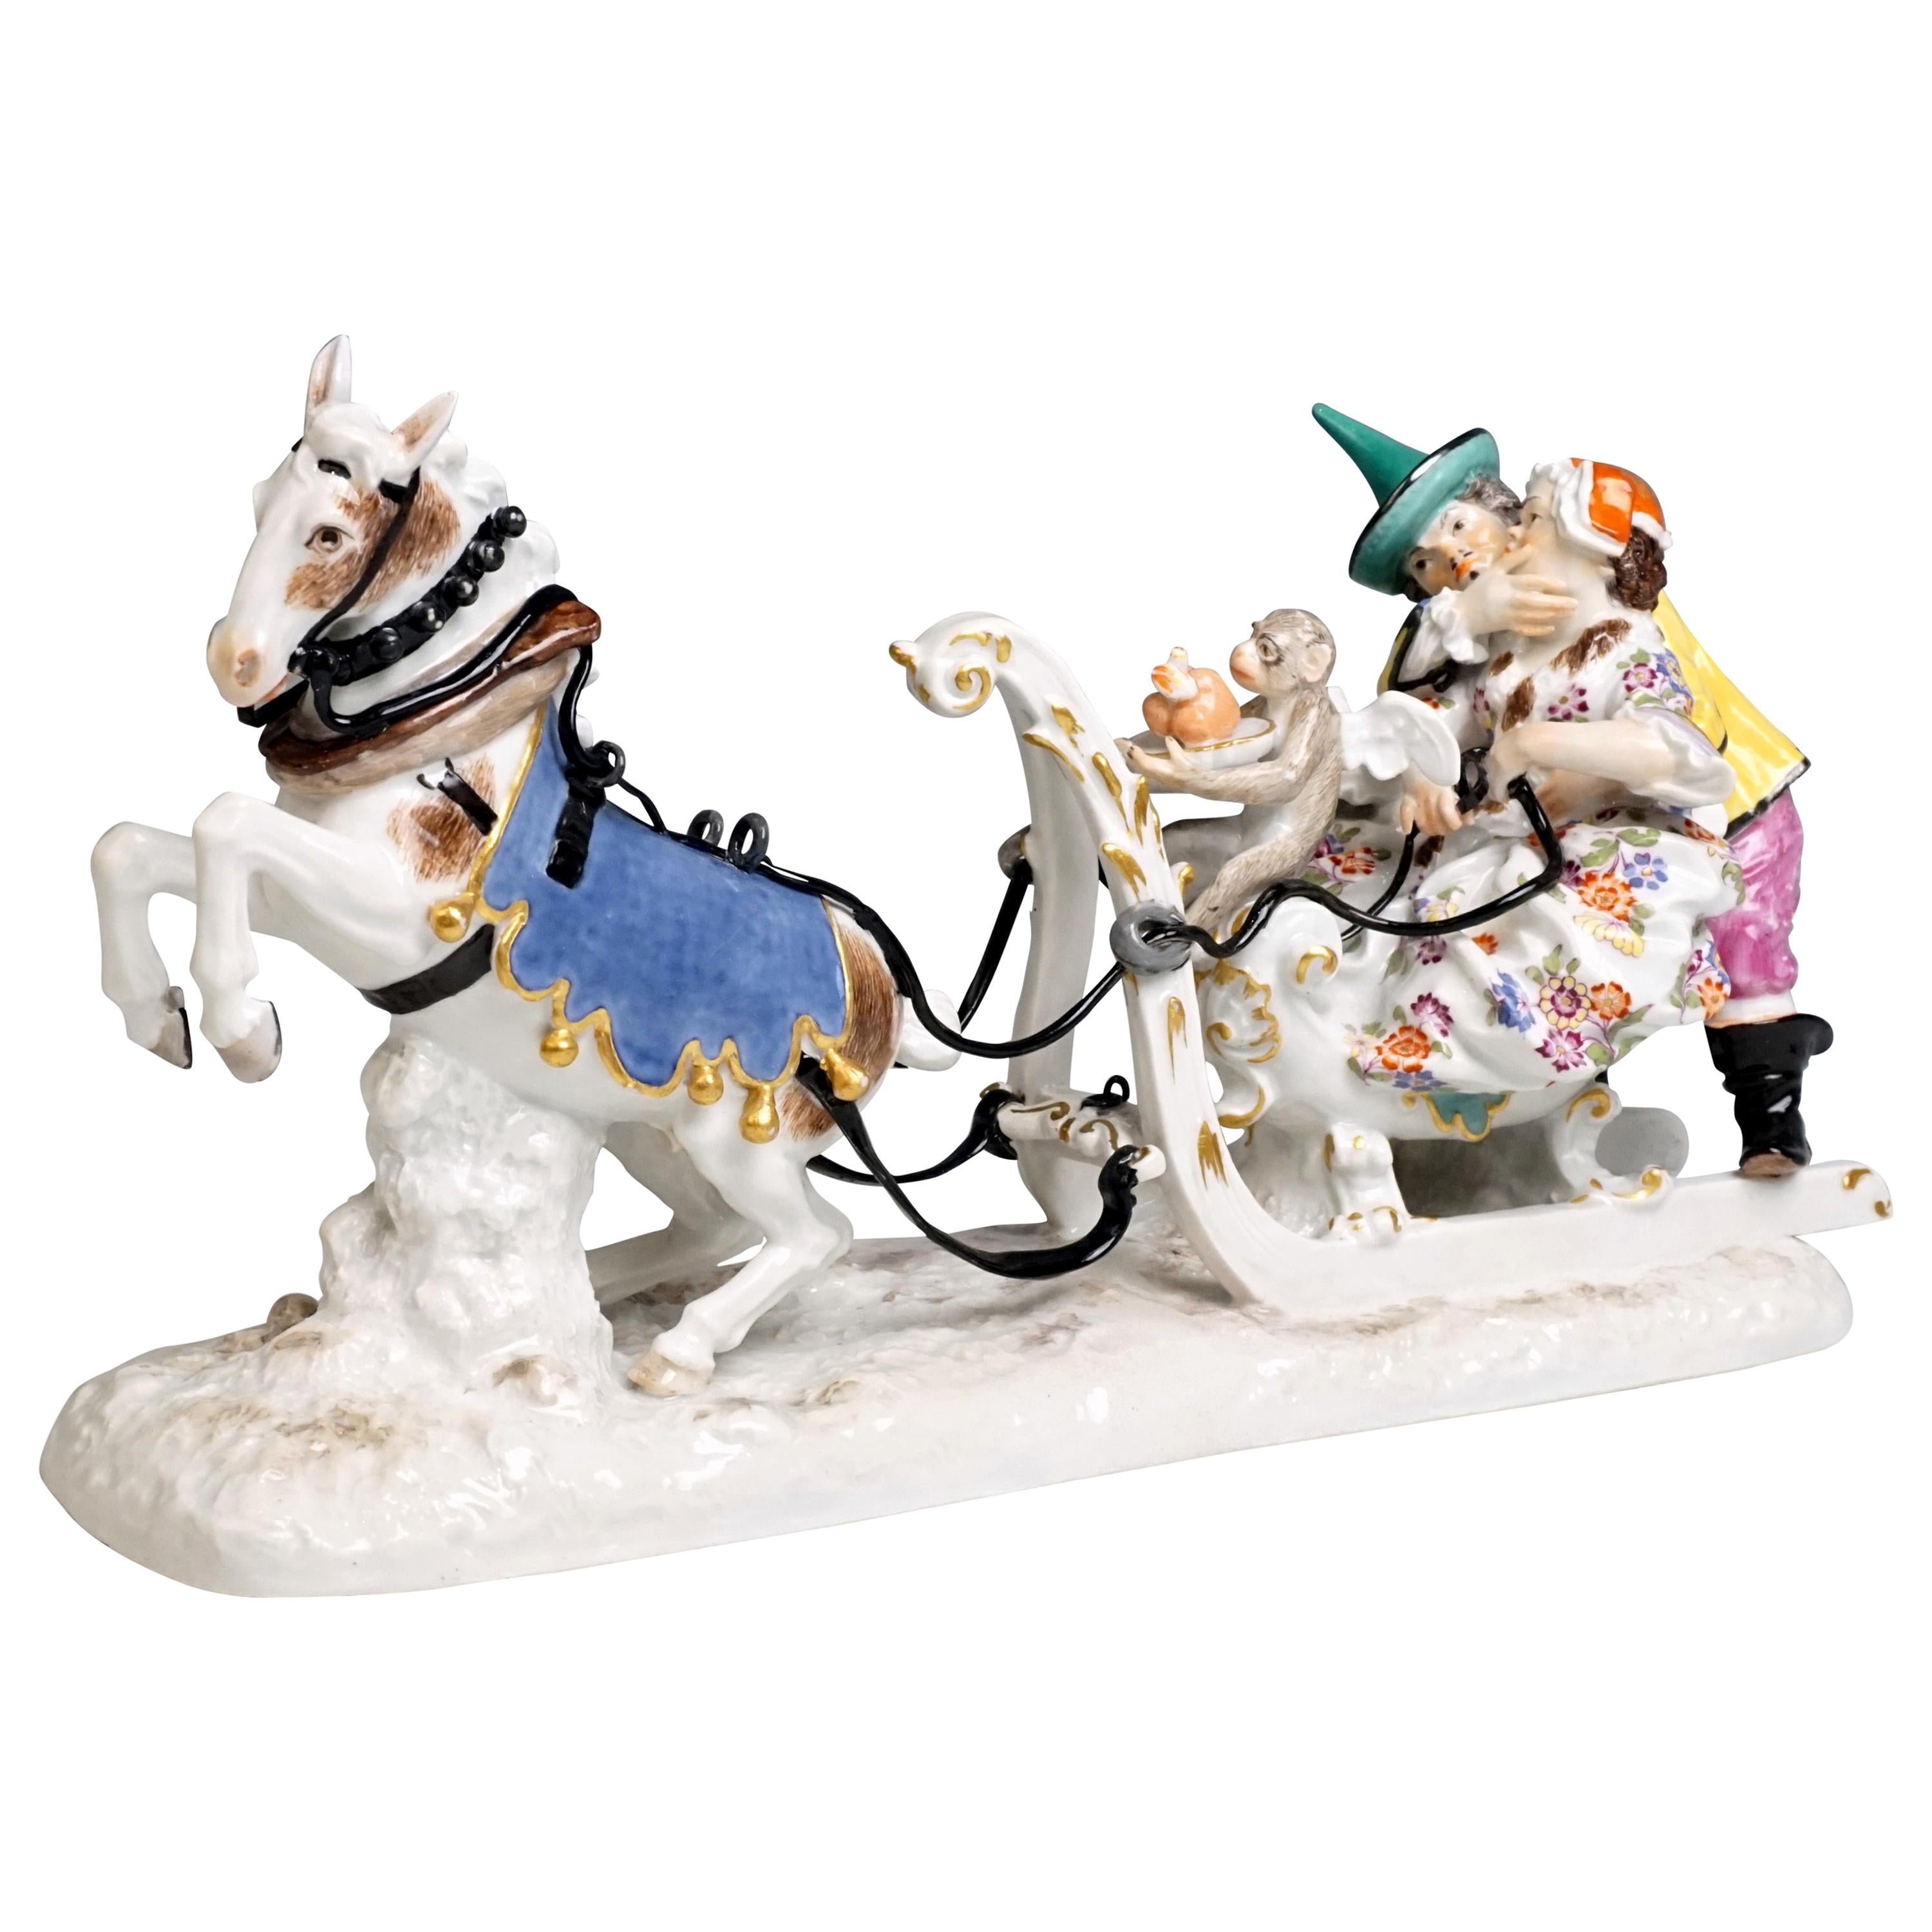 Baroque Meissen Group Sleigh Ride with The Court Jesters by Kaendler circa 1750